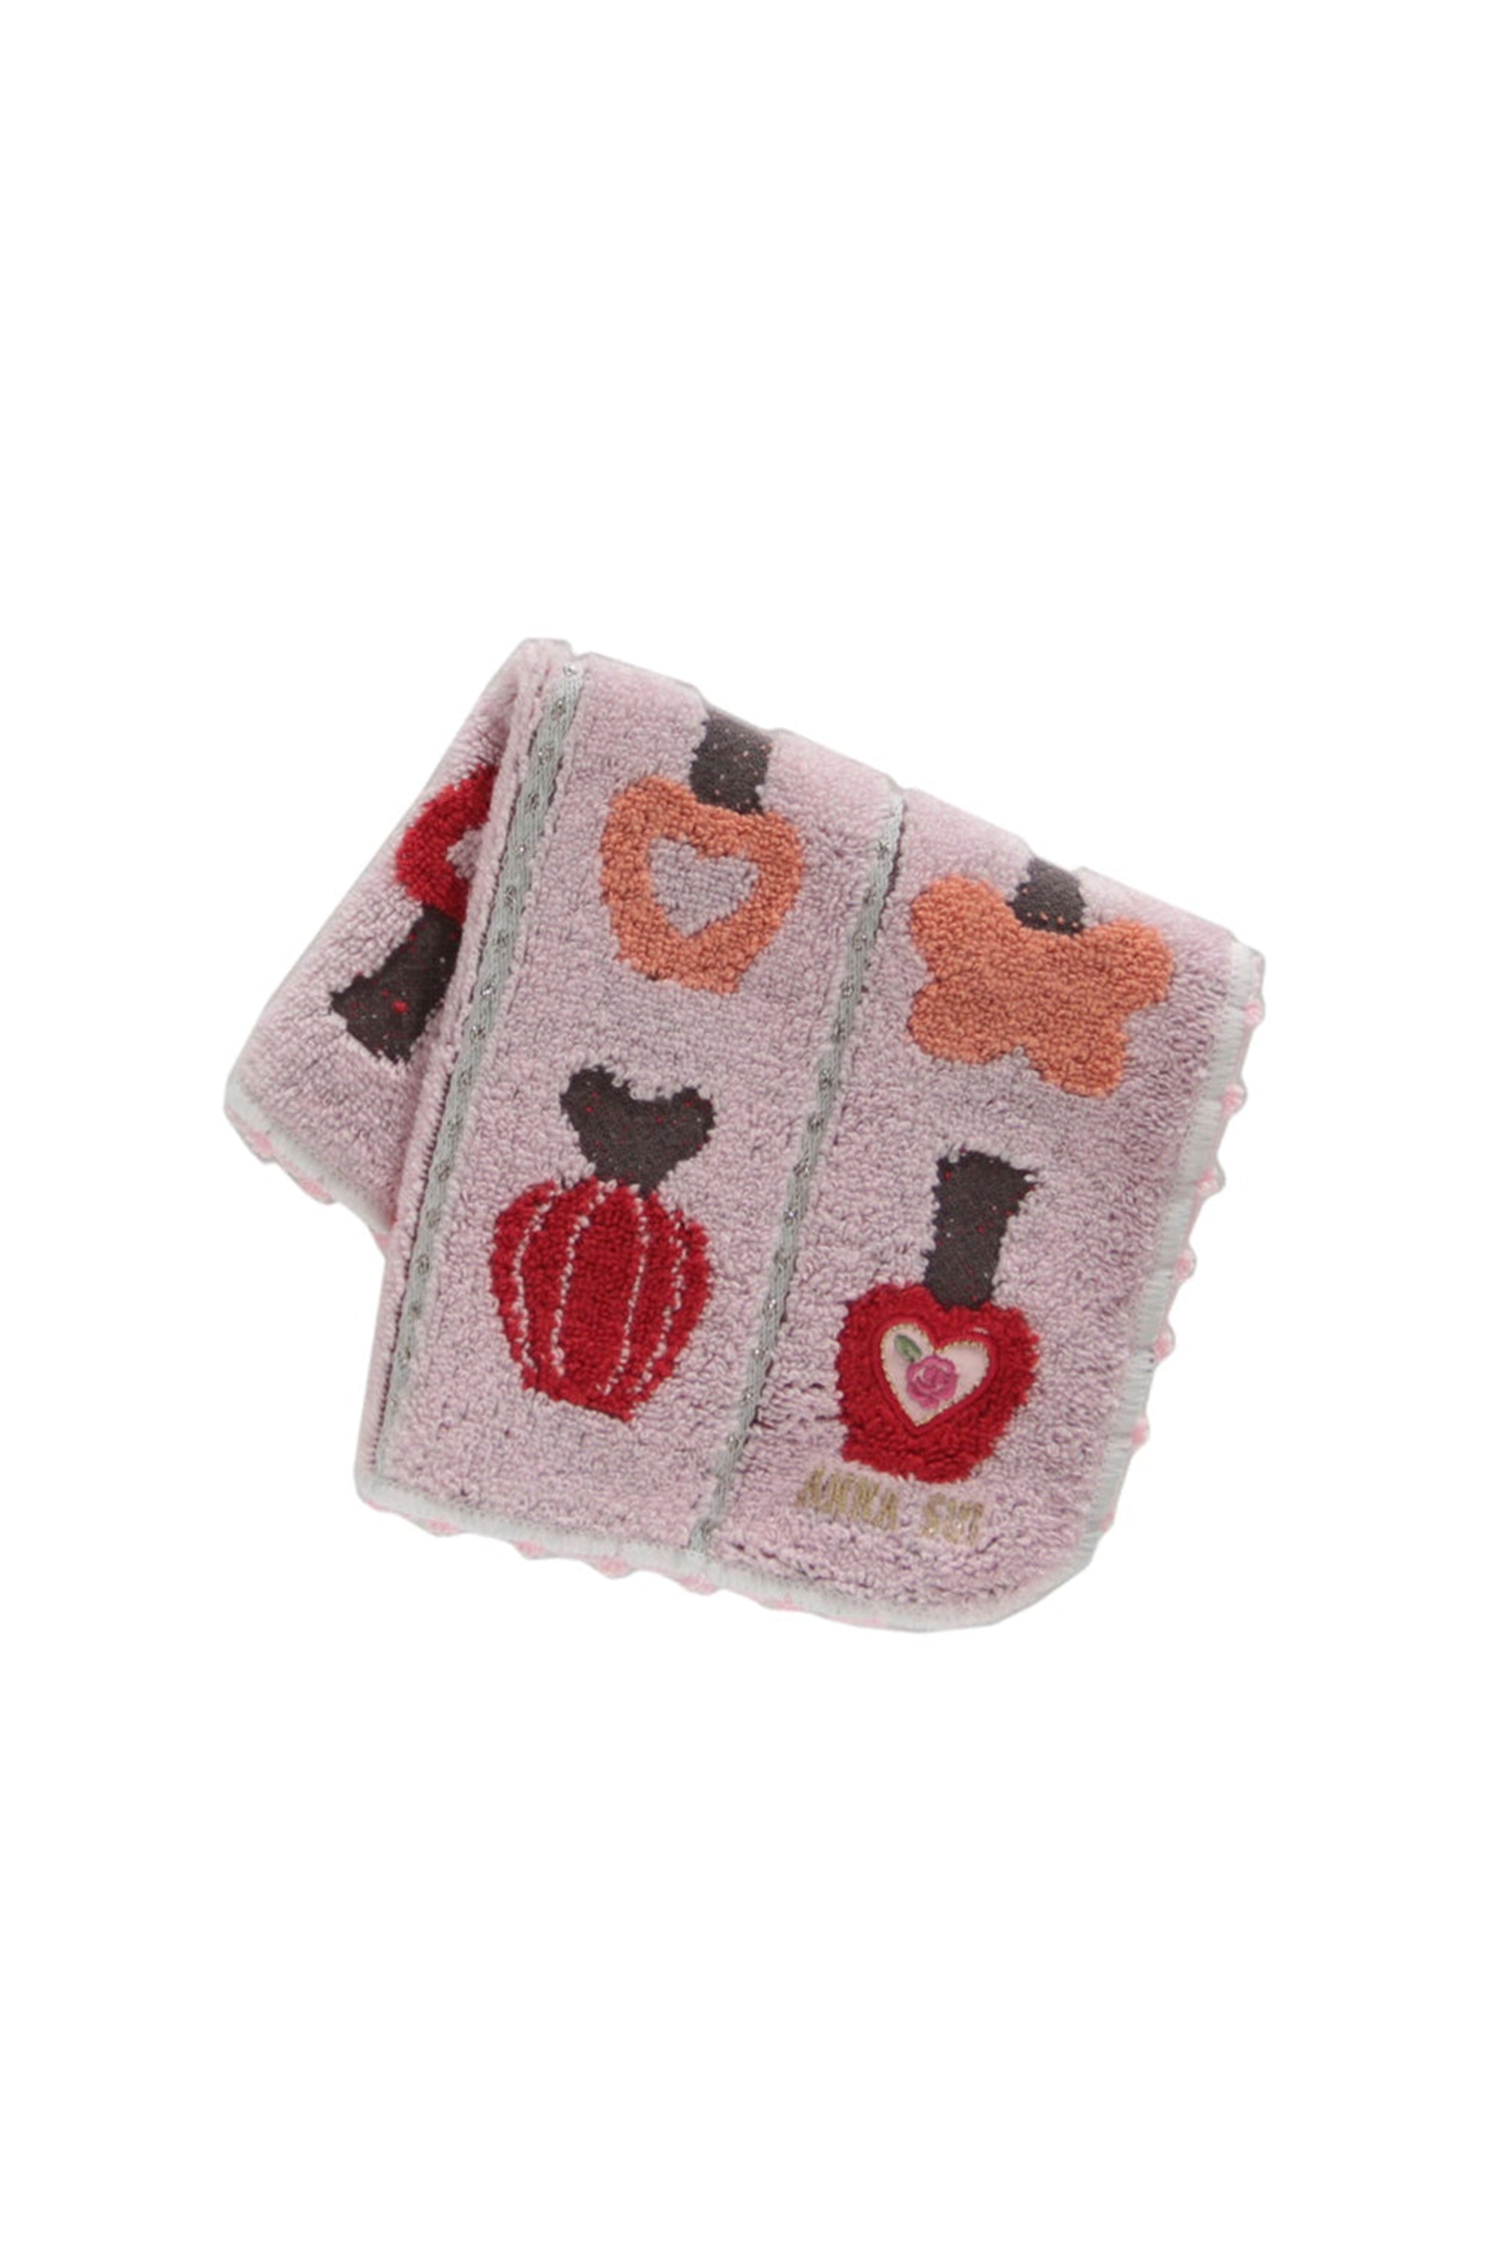 Washcloth, light rose, with lines of Nail Polish design bottles, Anna Sui label in the corner